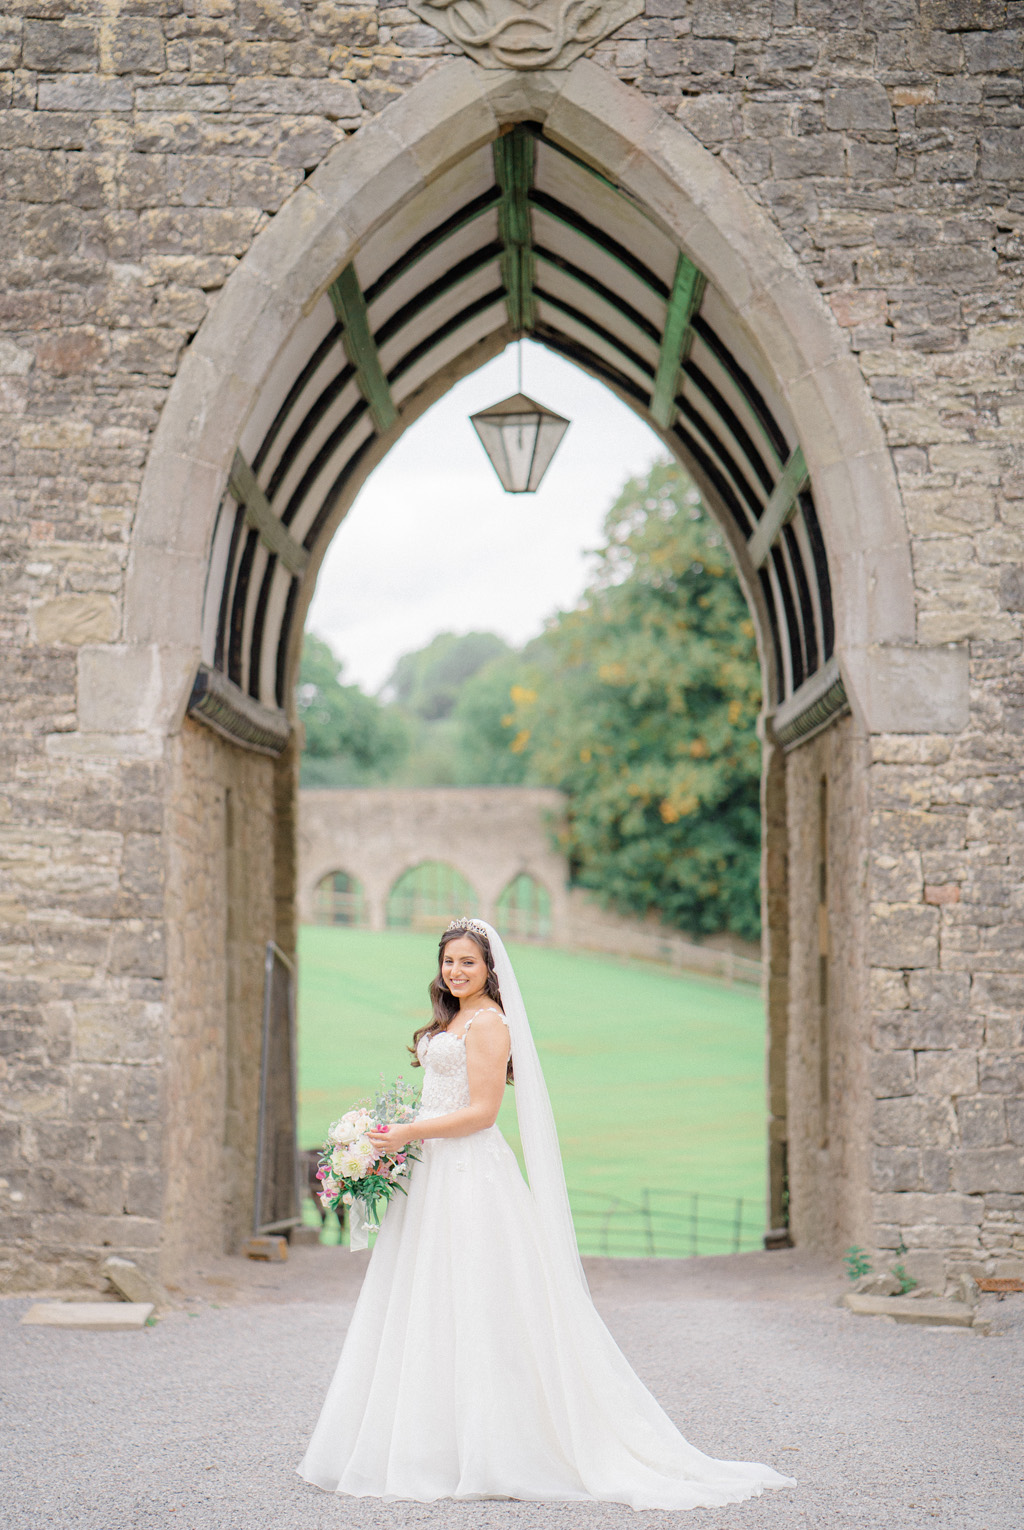 elegant and stylish modern classic wedding ideas from Clearwell Castle. Image credit Sara Cooper Photography